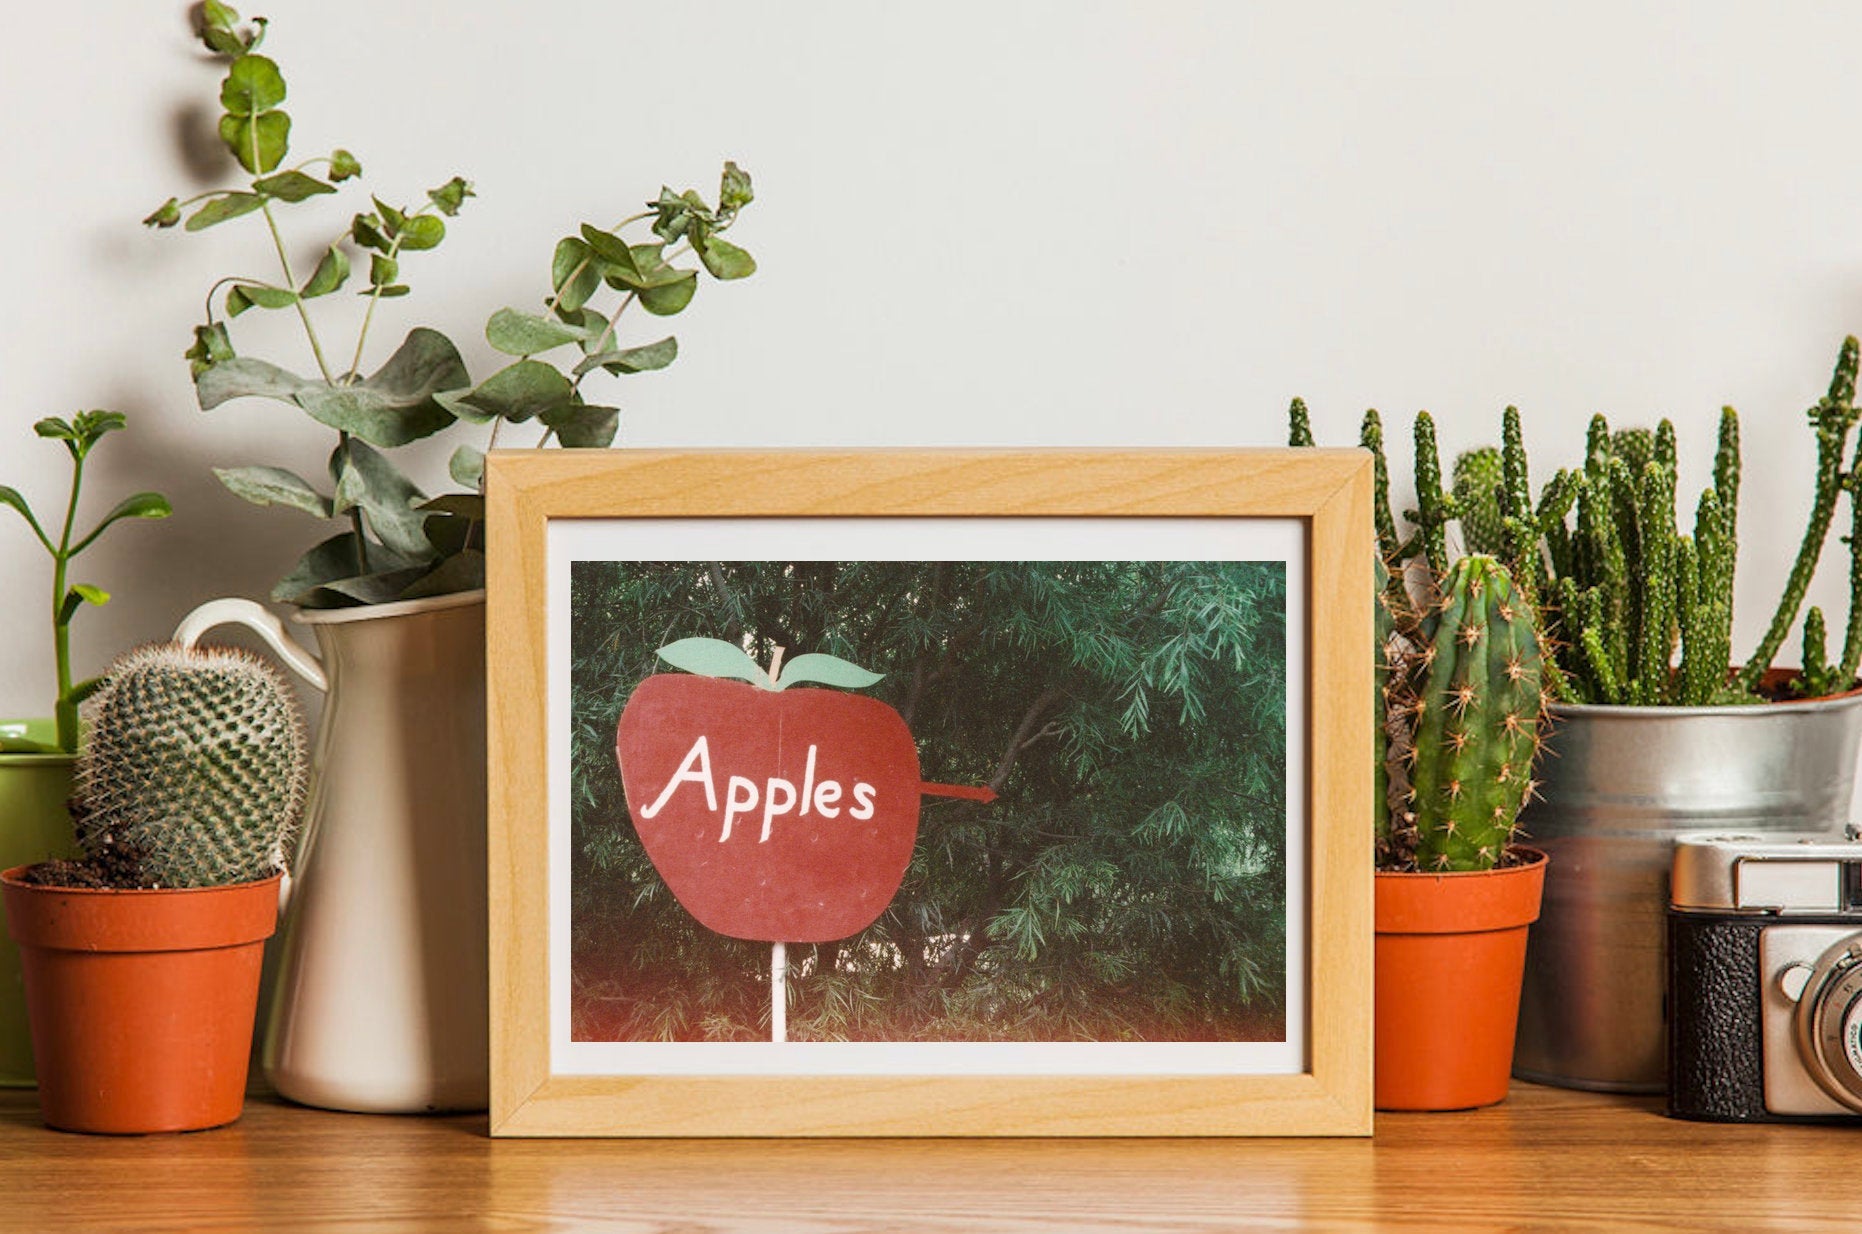 Apples For Sale • 35mm Film Photography Print - Retro Apple Orchard Sign